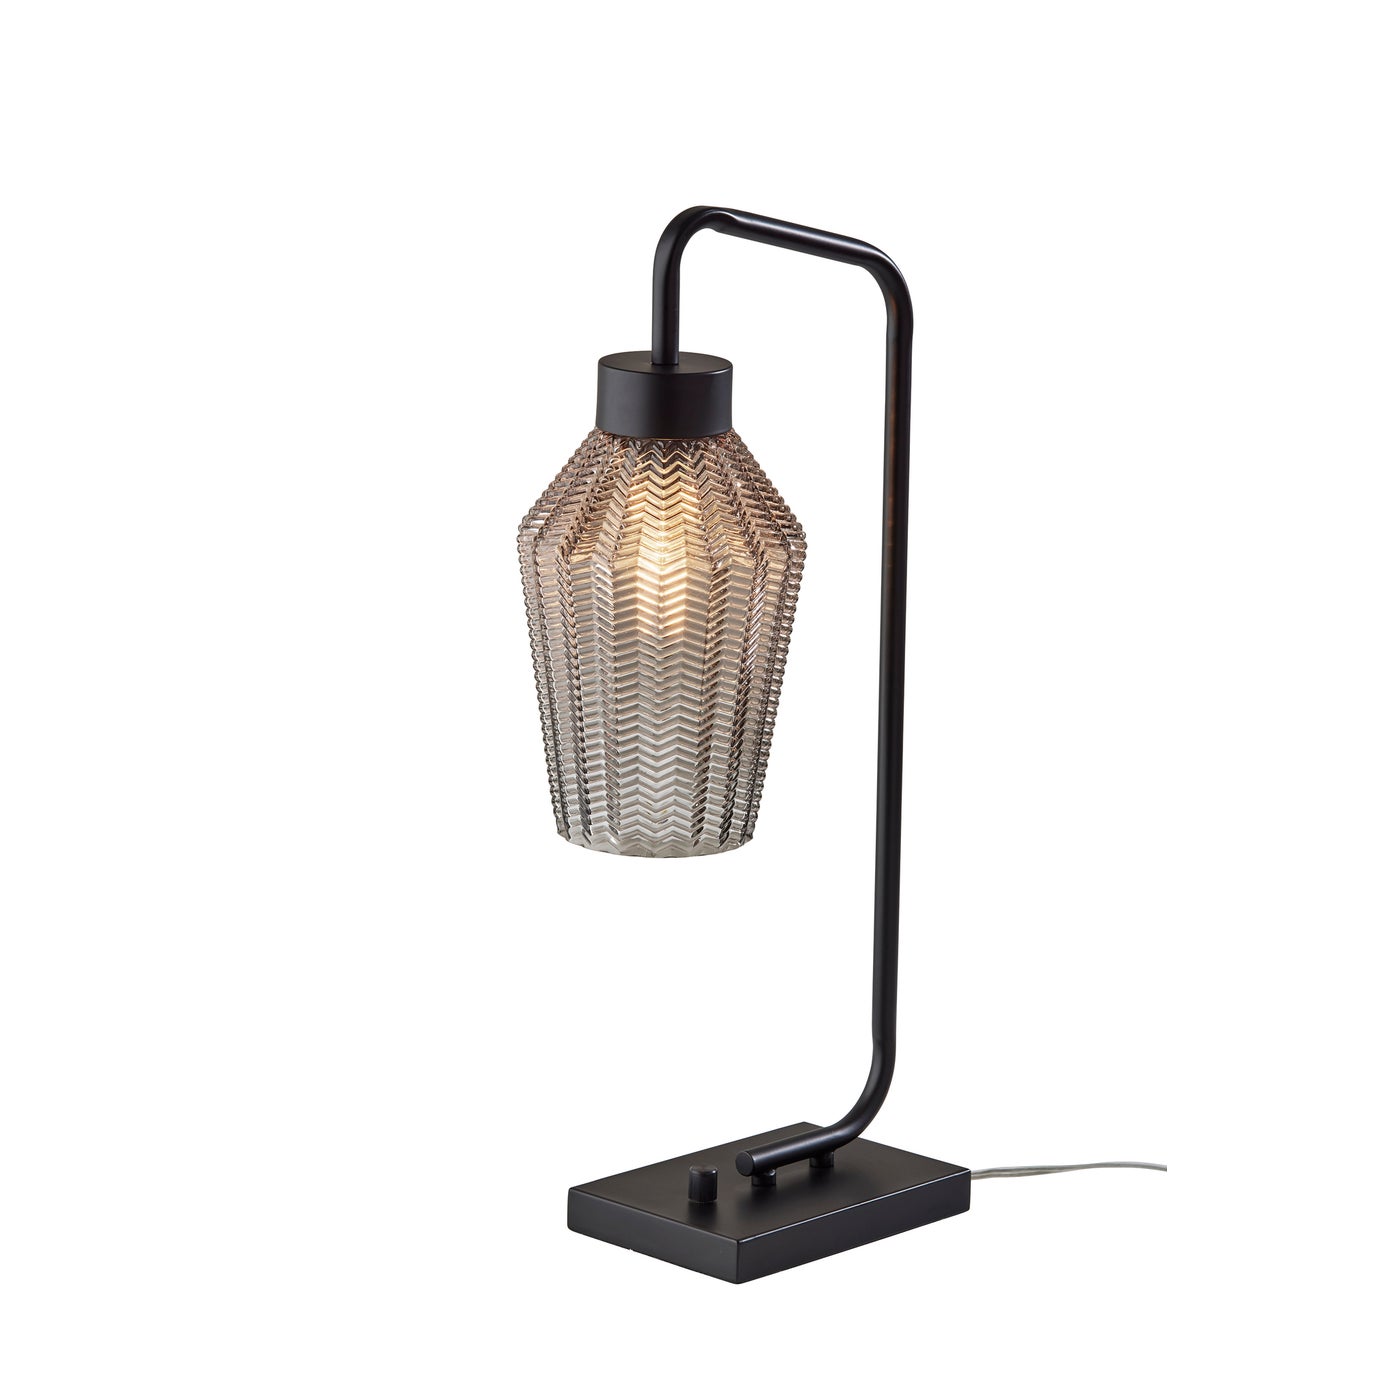 Adesso Home - 3878-01 - Table Lamp - Belfry - Black